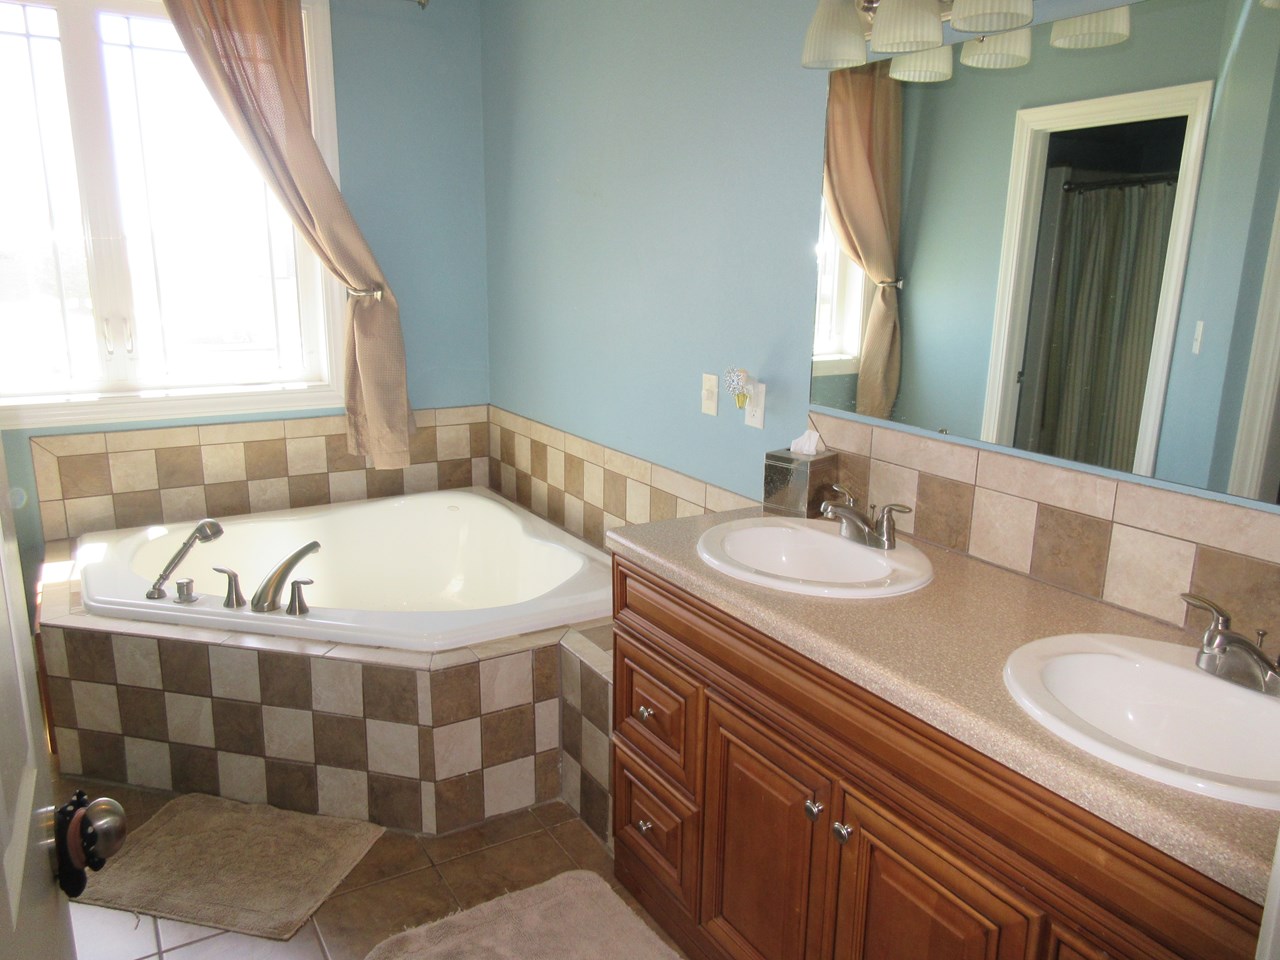 master bathroom dual sink and bubble tub.  seperate room for shower and stool.  walk in closets.